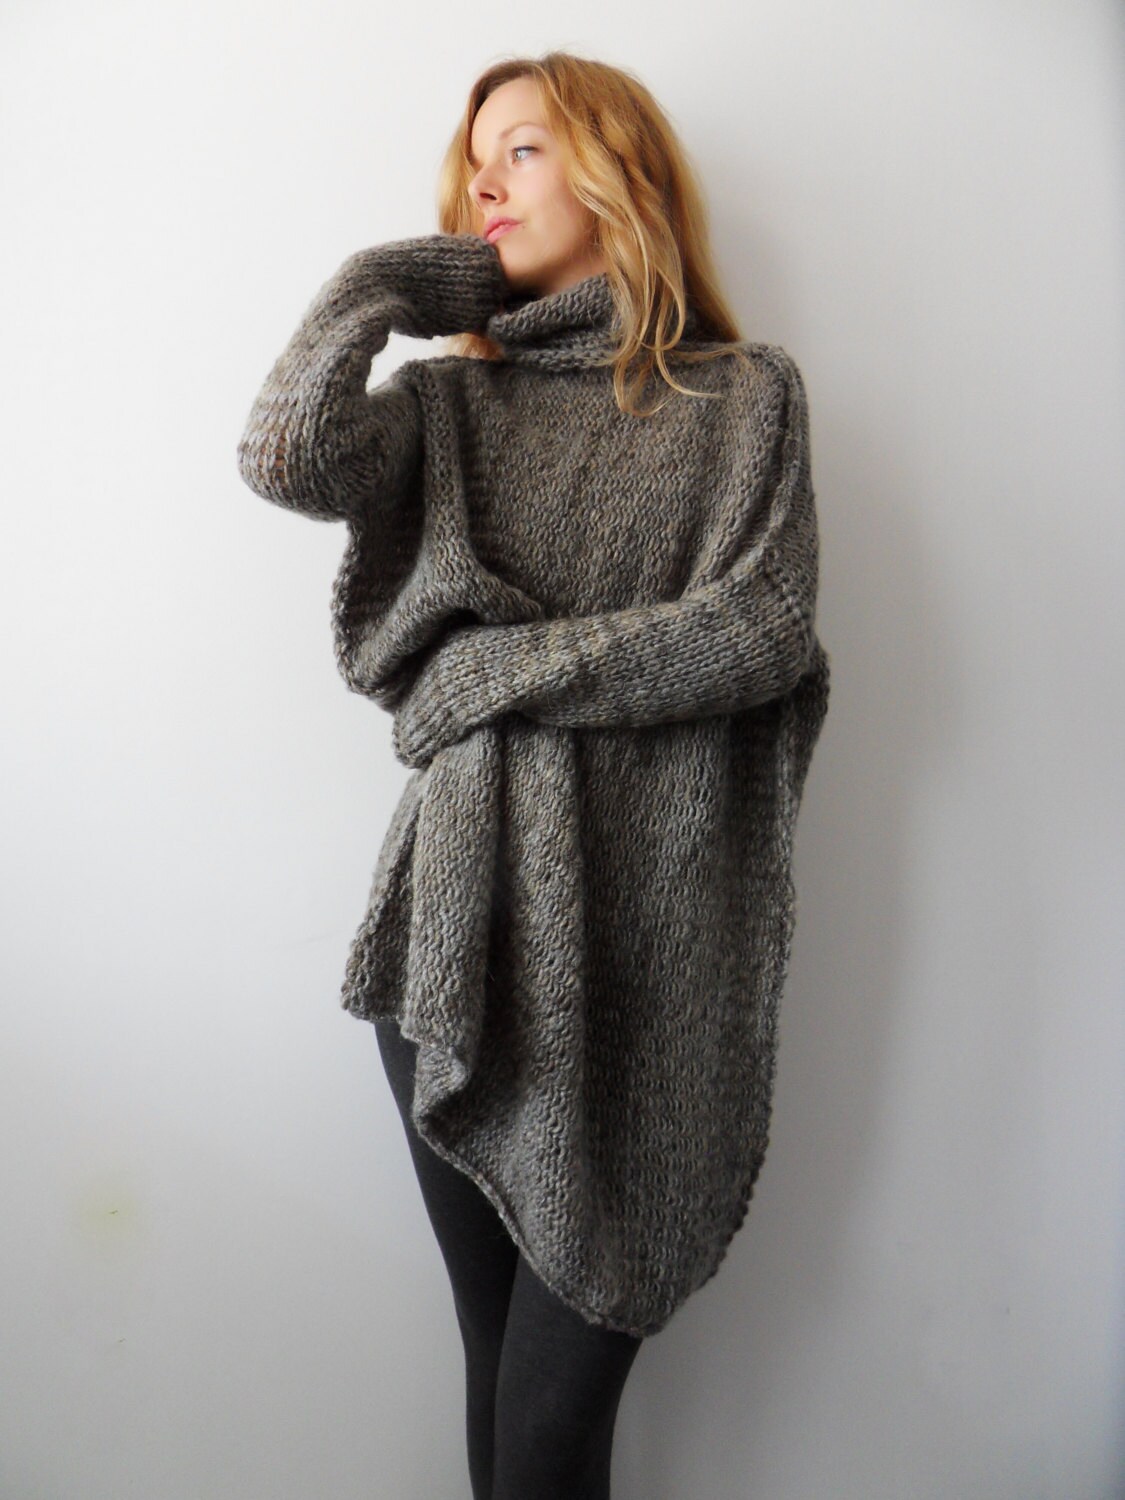 Limited addition . Slouchy/Bulky /Oversized sweater.Chunky